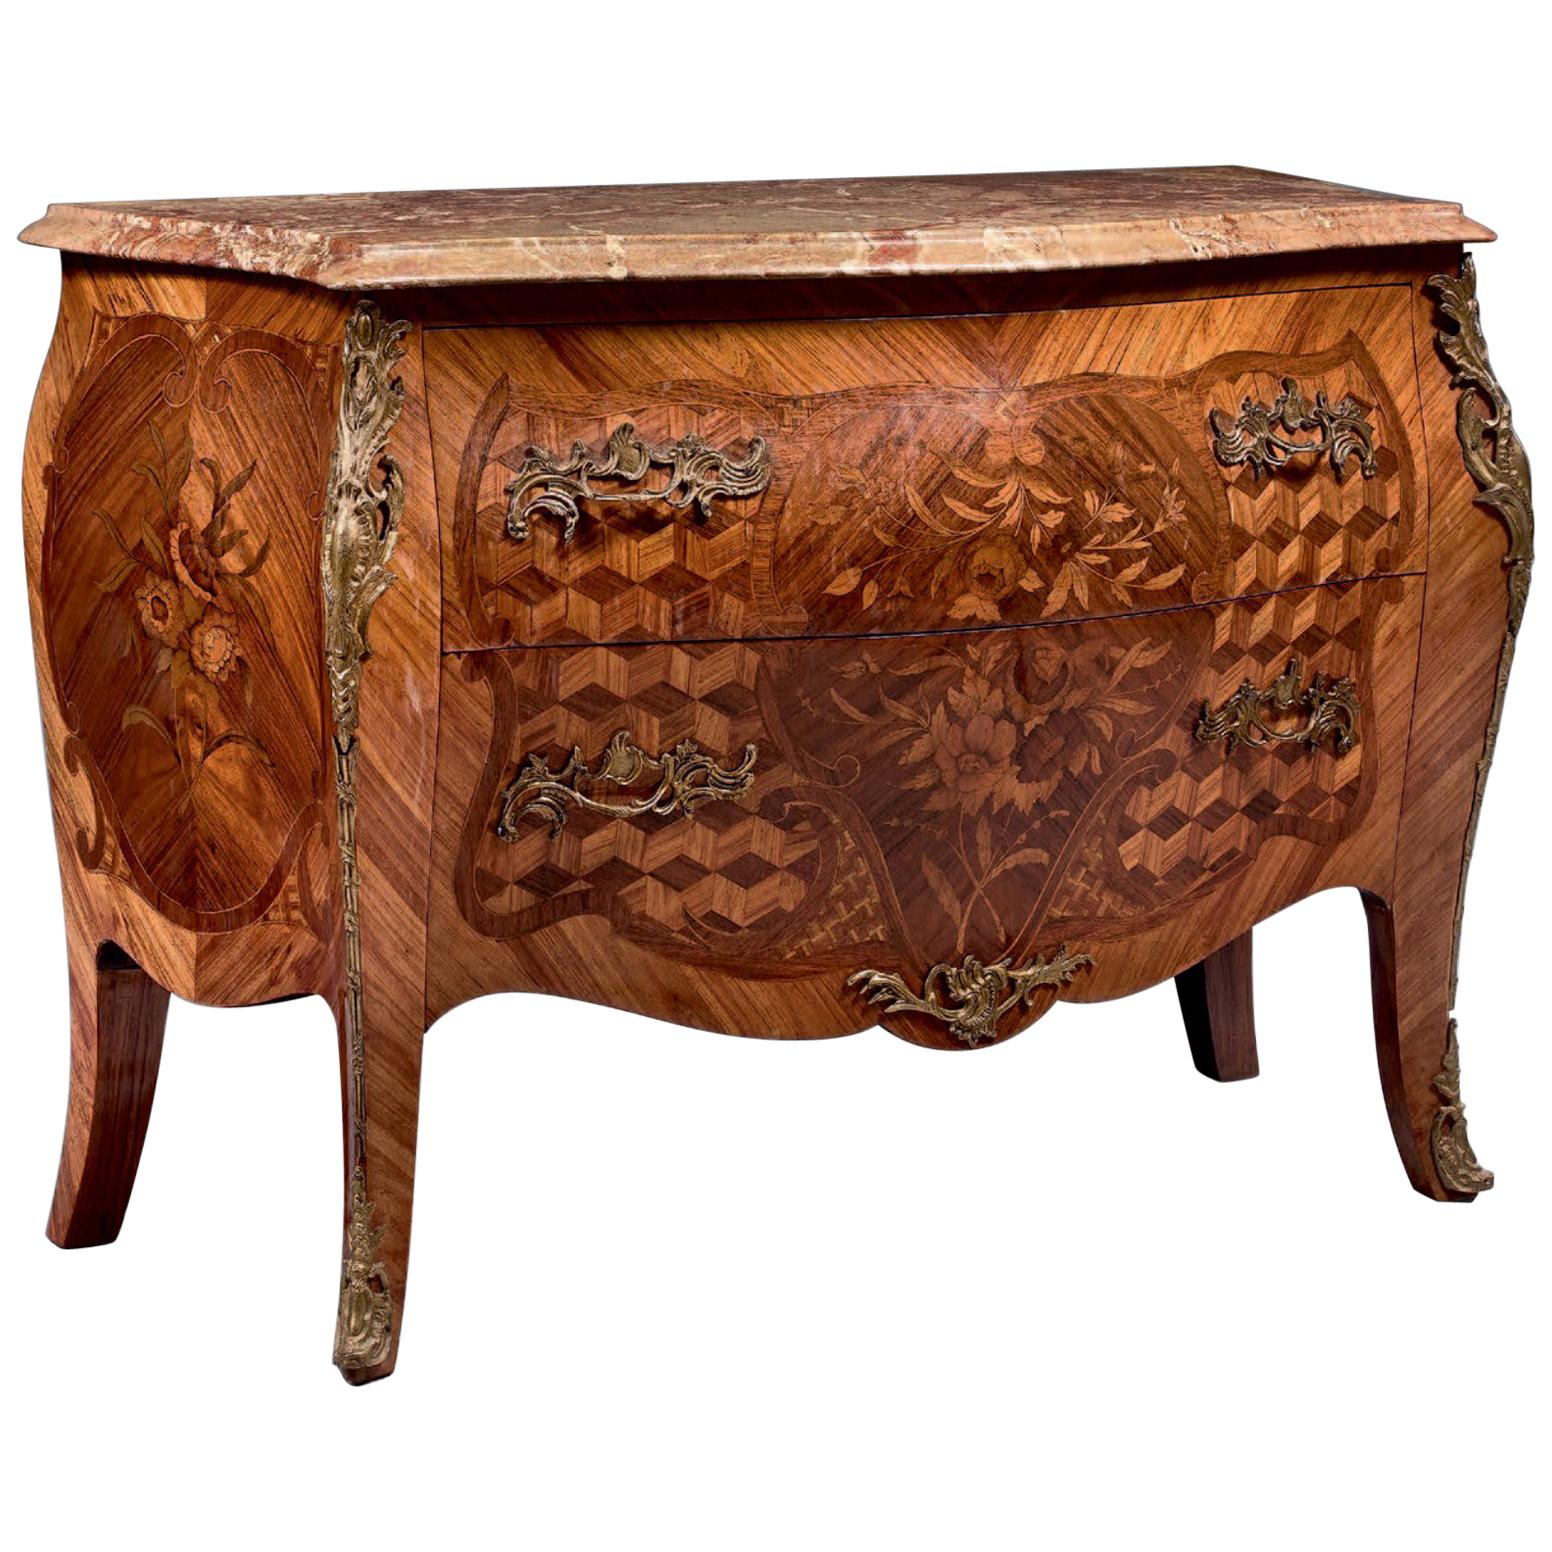 19th Century French Inlaid Two Drawers Rosewood Commode in Louis XV Style For Sale